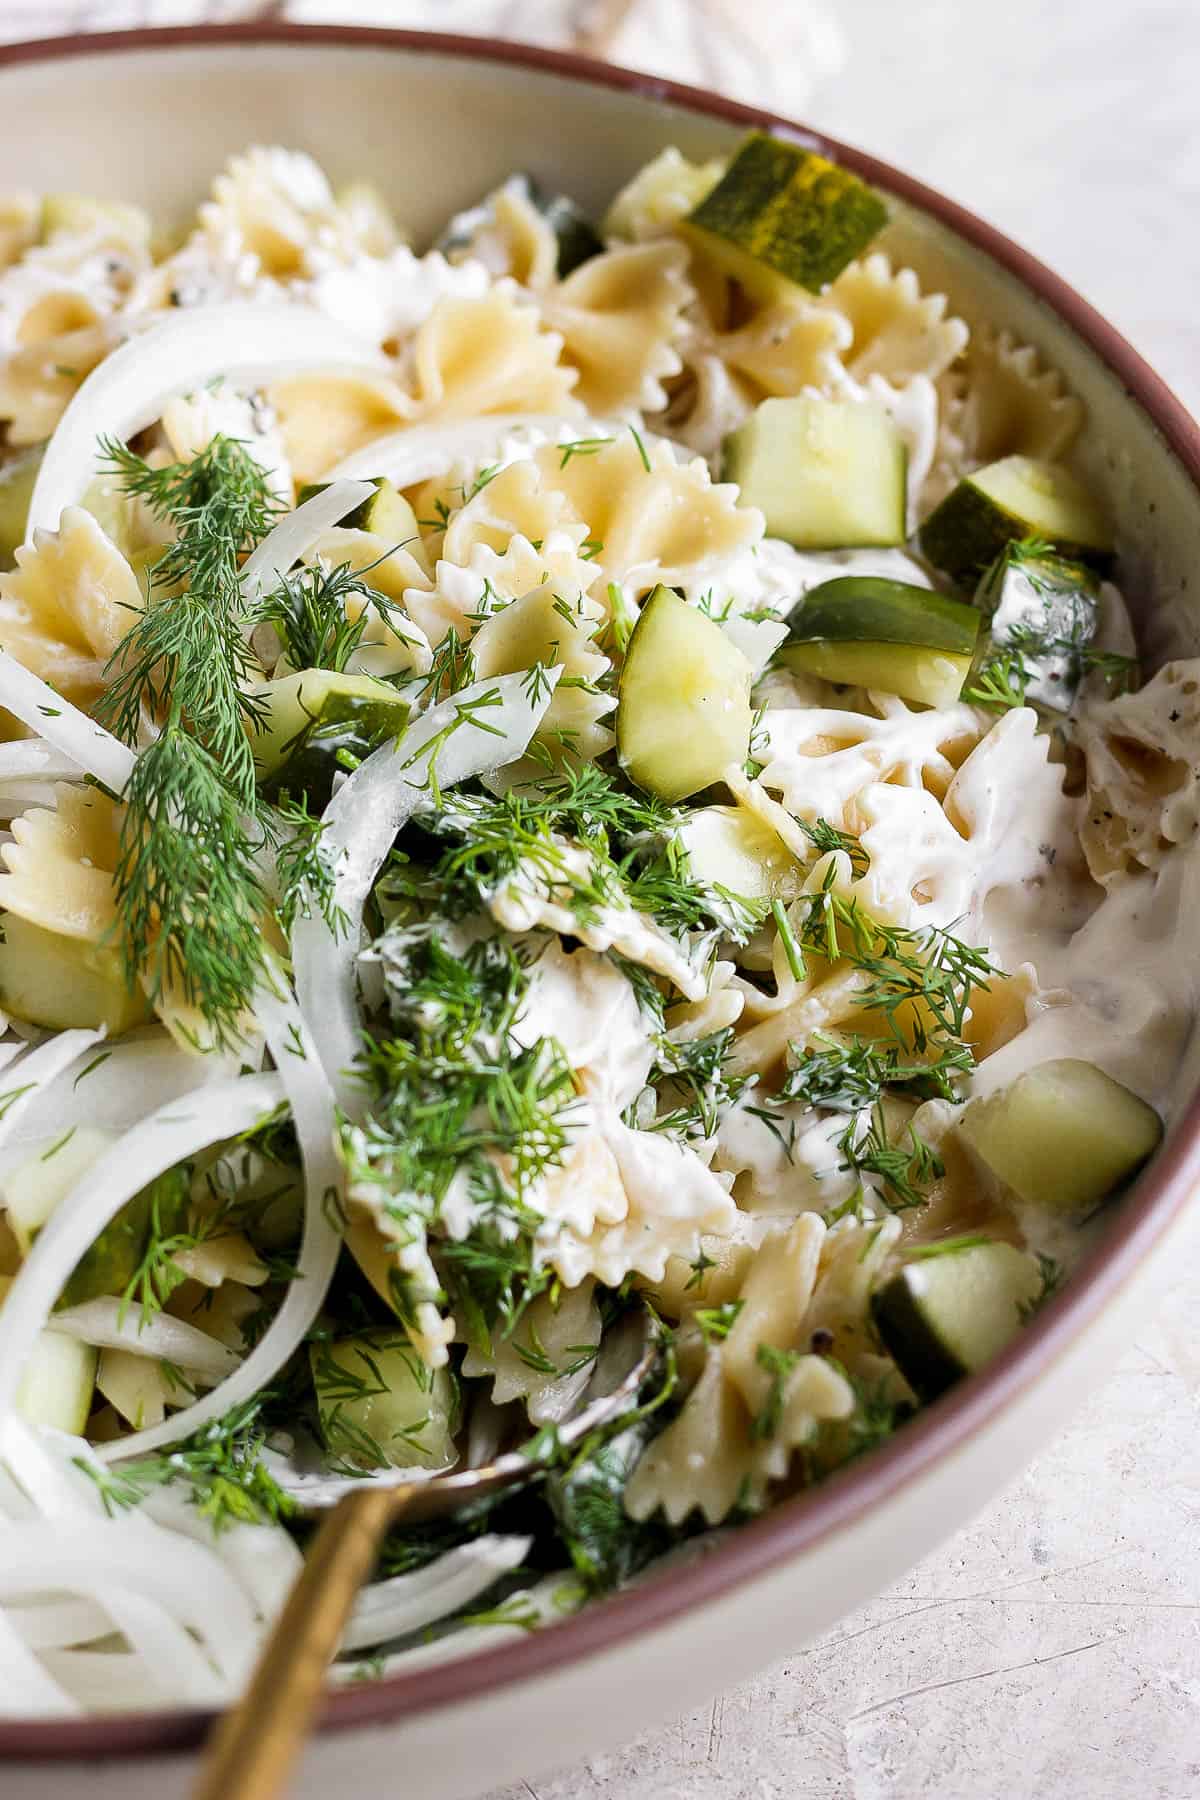 Dill pickle pasta salad in a large bowl.